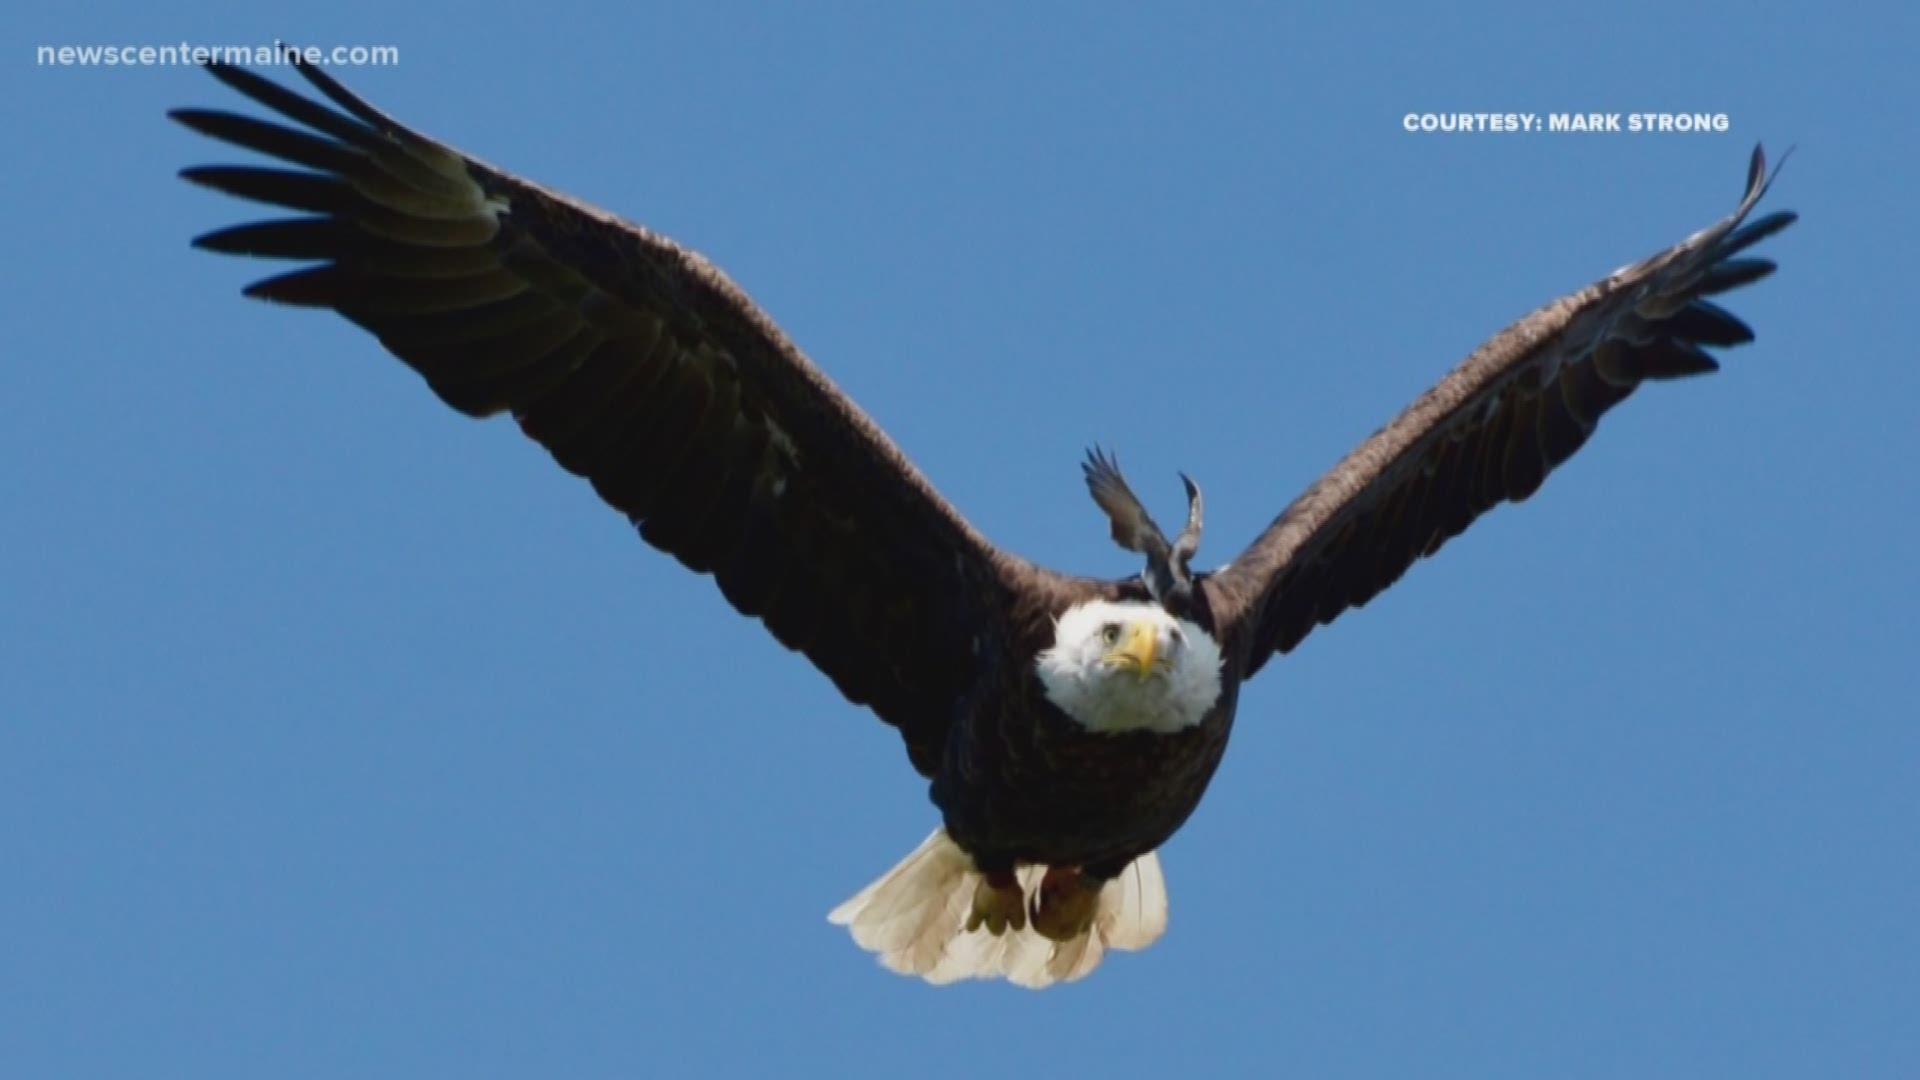 The amazing pictures of a bird hitching a hike on an eagle were taken from Sebago Lake by Mark Strong.